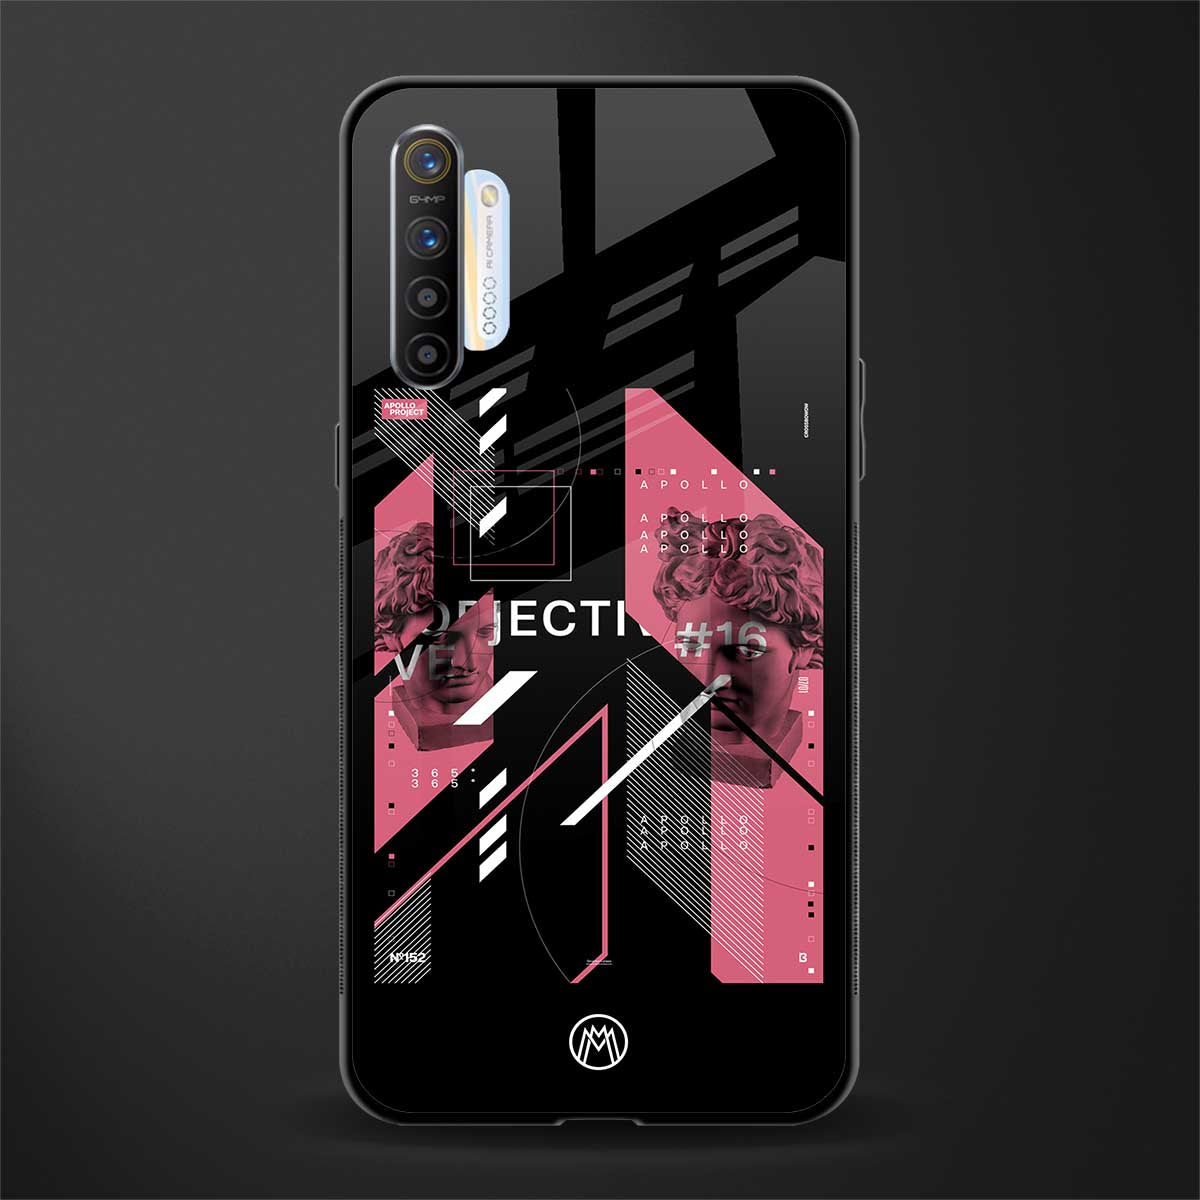 apollo project aesthetic pink and black glass case for realme xt image